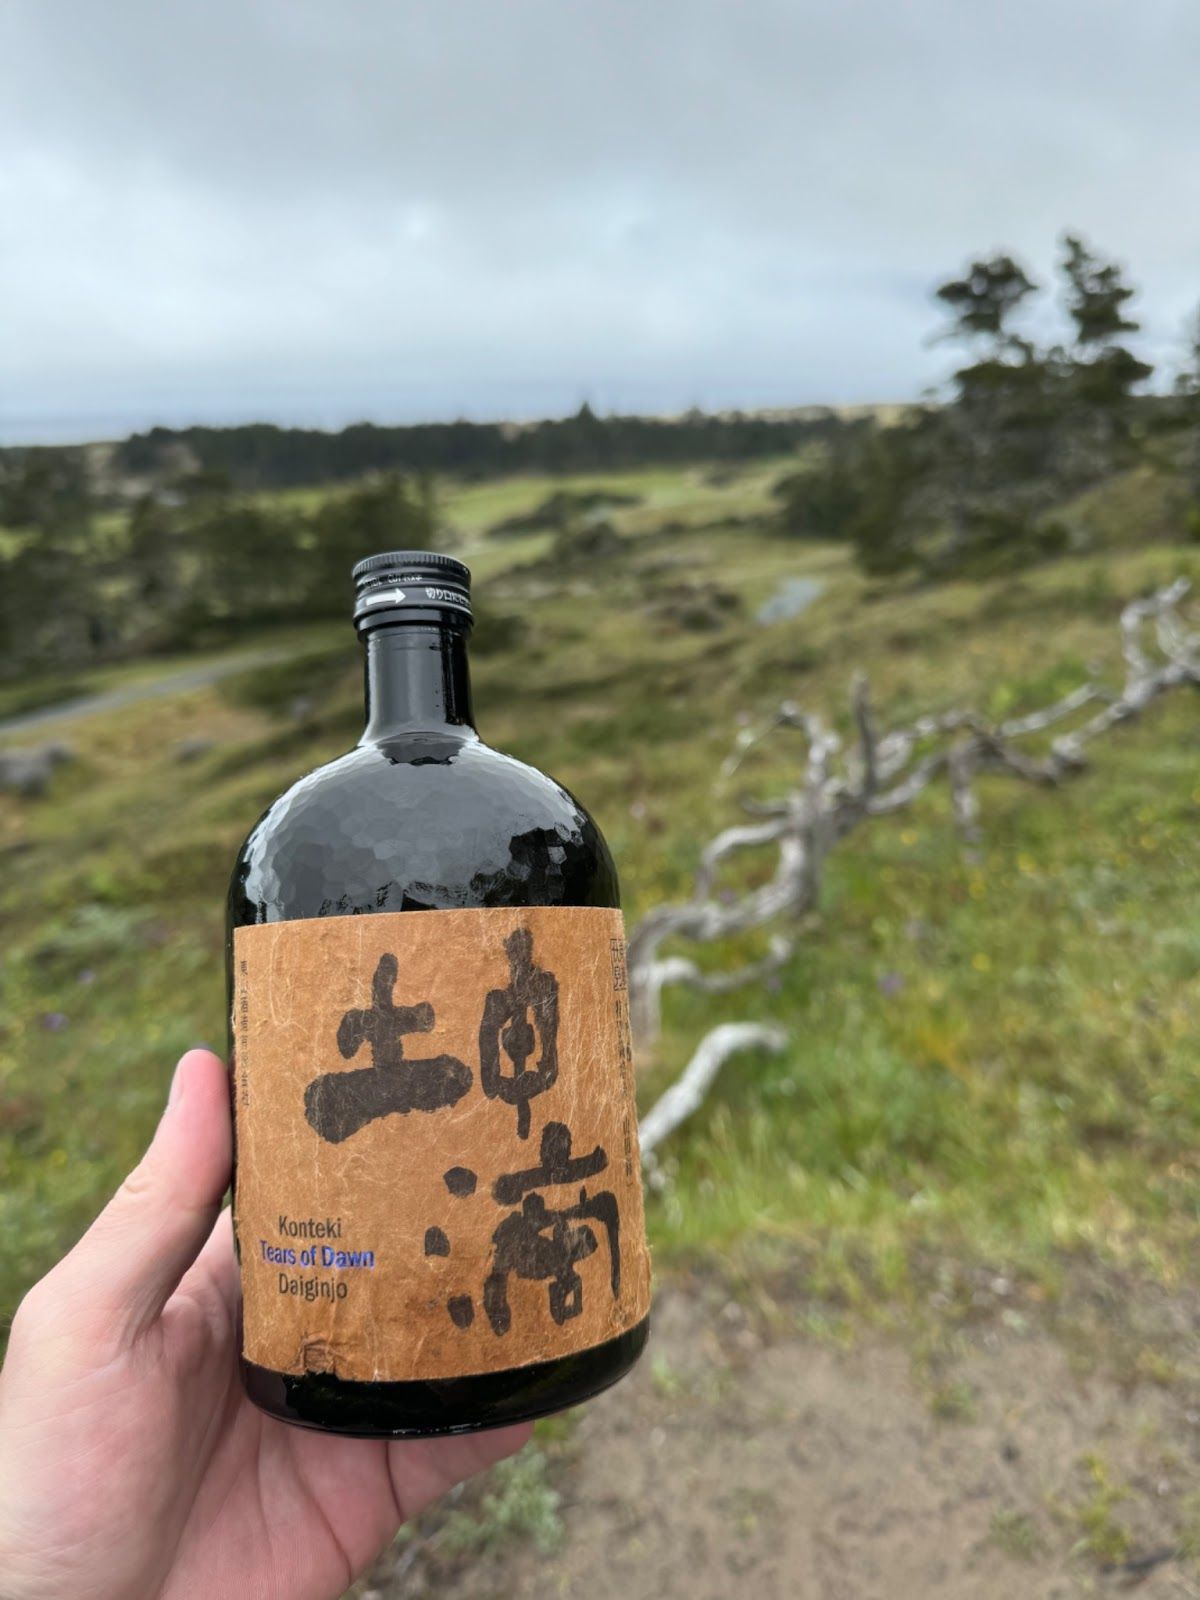 TC holds up some sake to Bandon Dunes in the background.